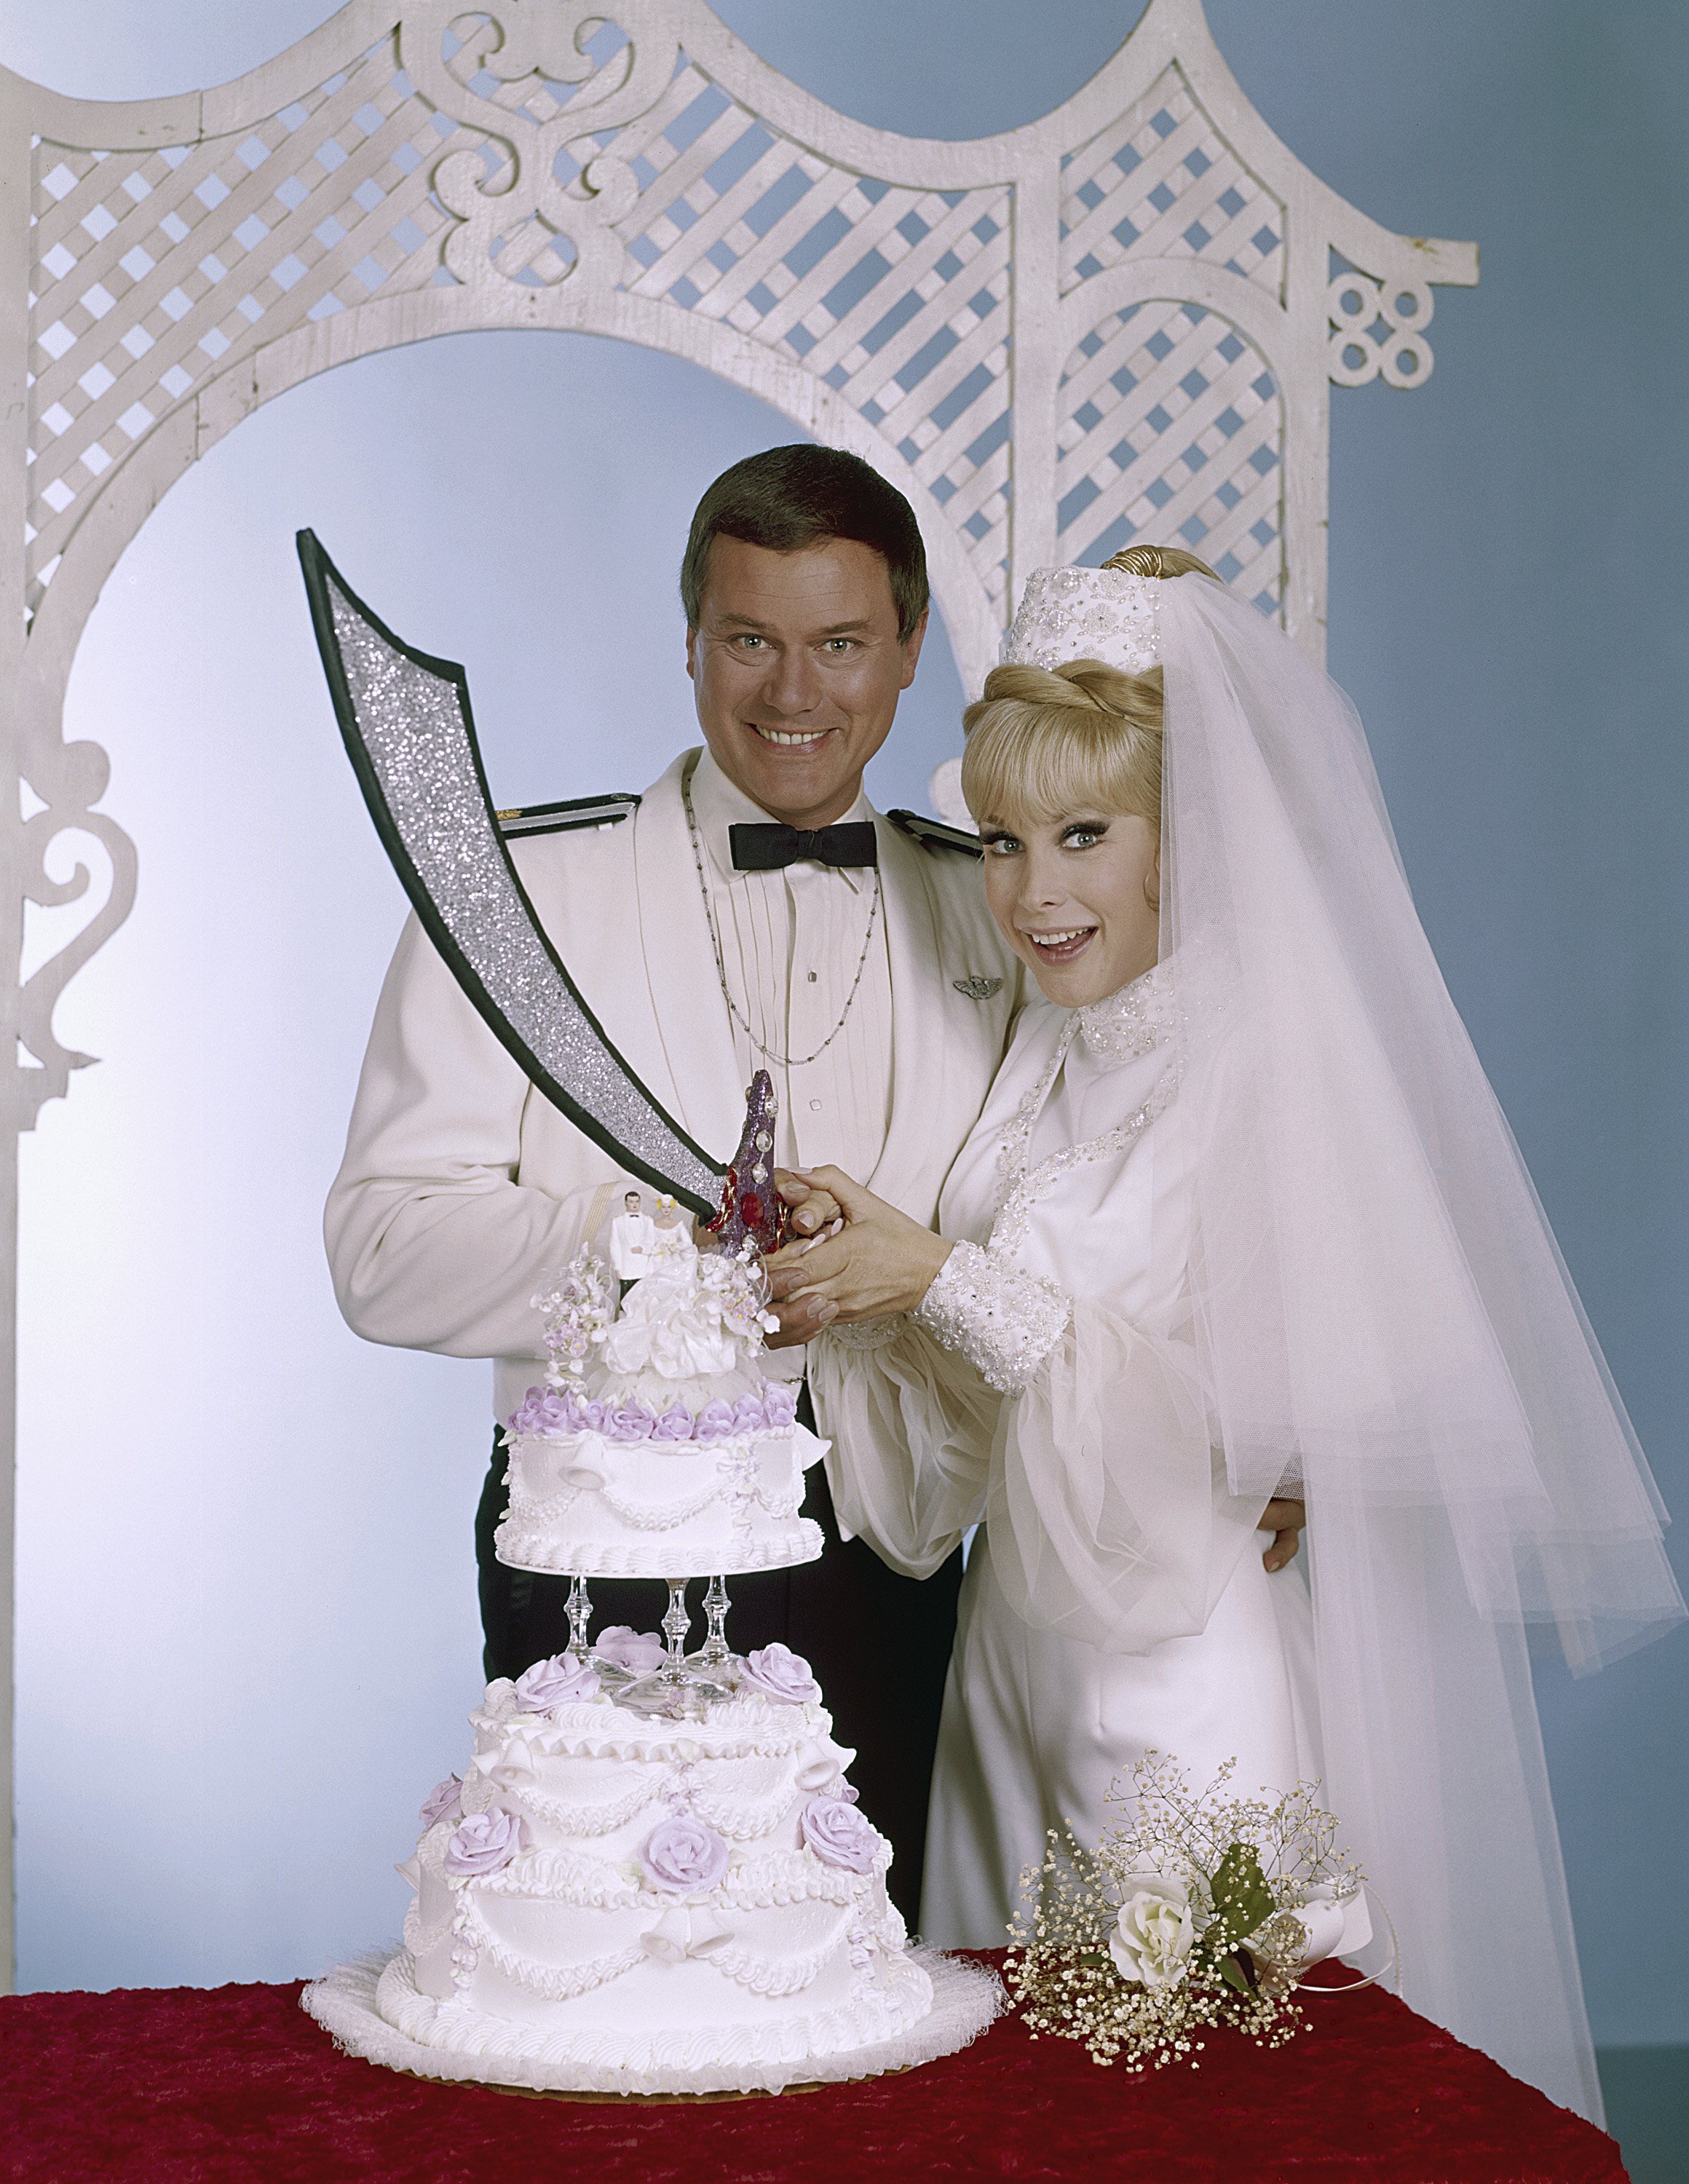 Pictured: TV stars Larry Hagman as Anthony 'Tony' Nelson and Barbara Eden as Jeannie during Season 5 of "I Dream of Jeannie" | Photo: Getty Images